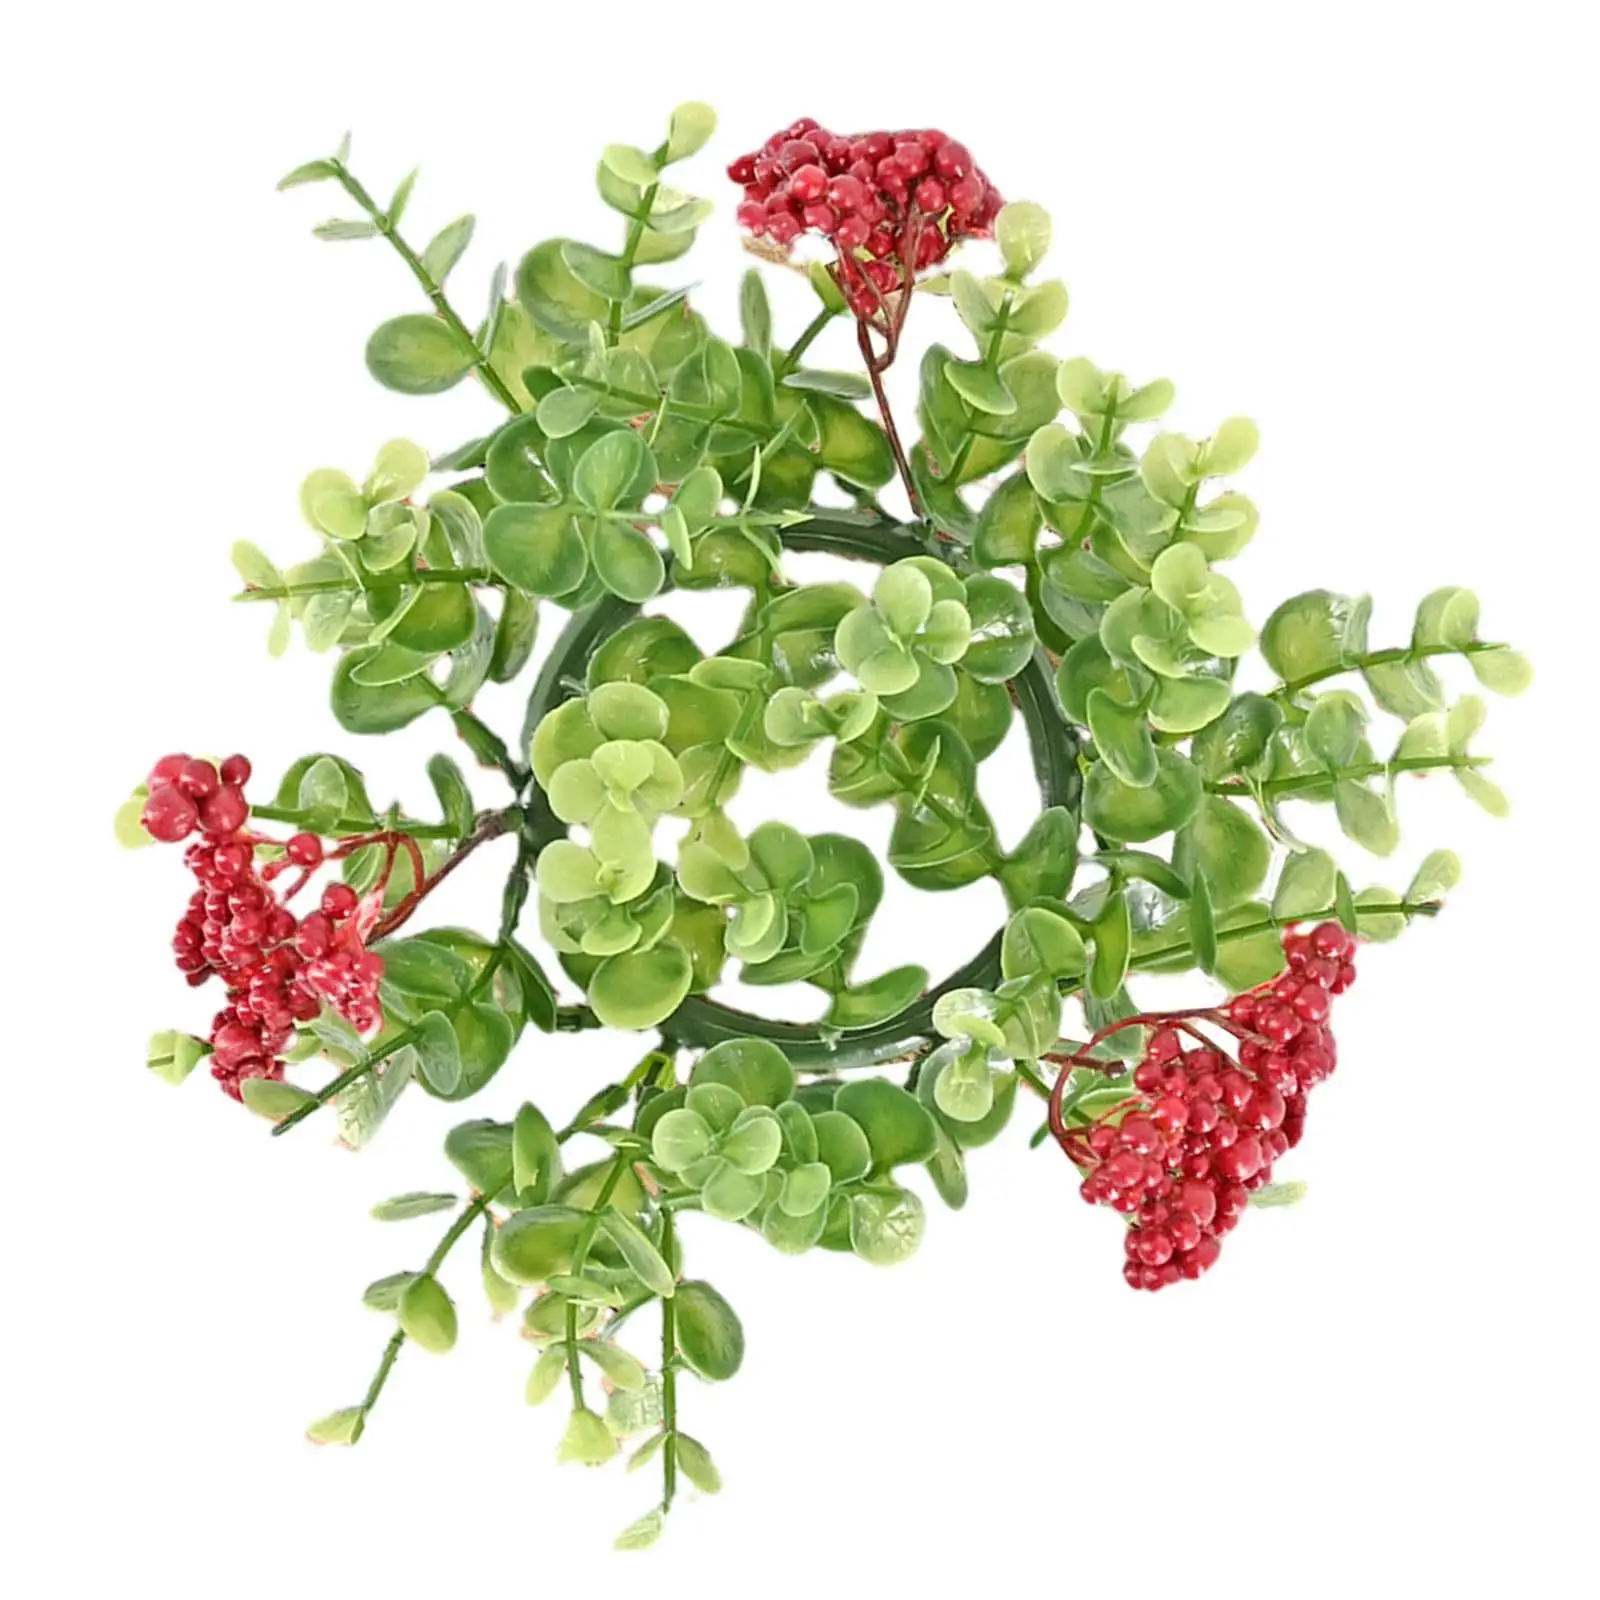 Berries Candle Rings Wreaths Christmas Decoration Berries Candle Holder for Dining Table Livingroom Parties Farmhouse Cafes